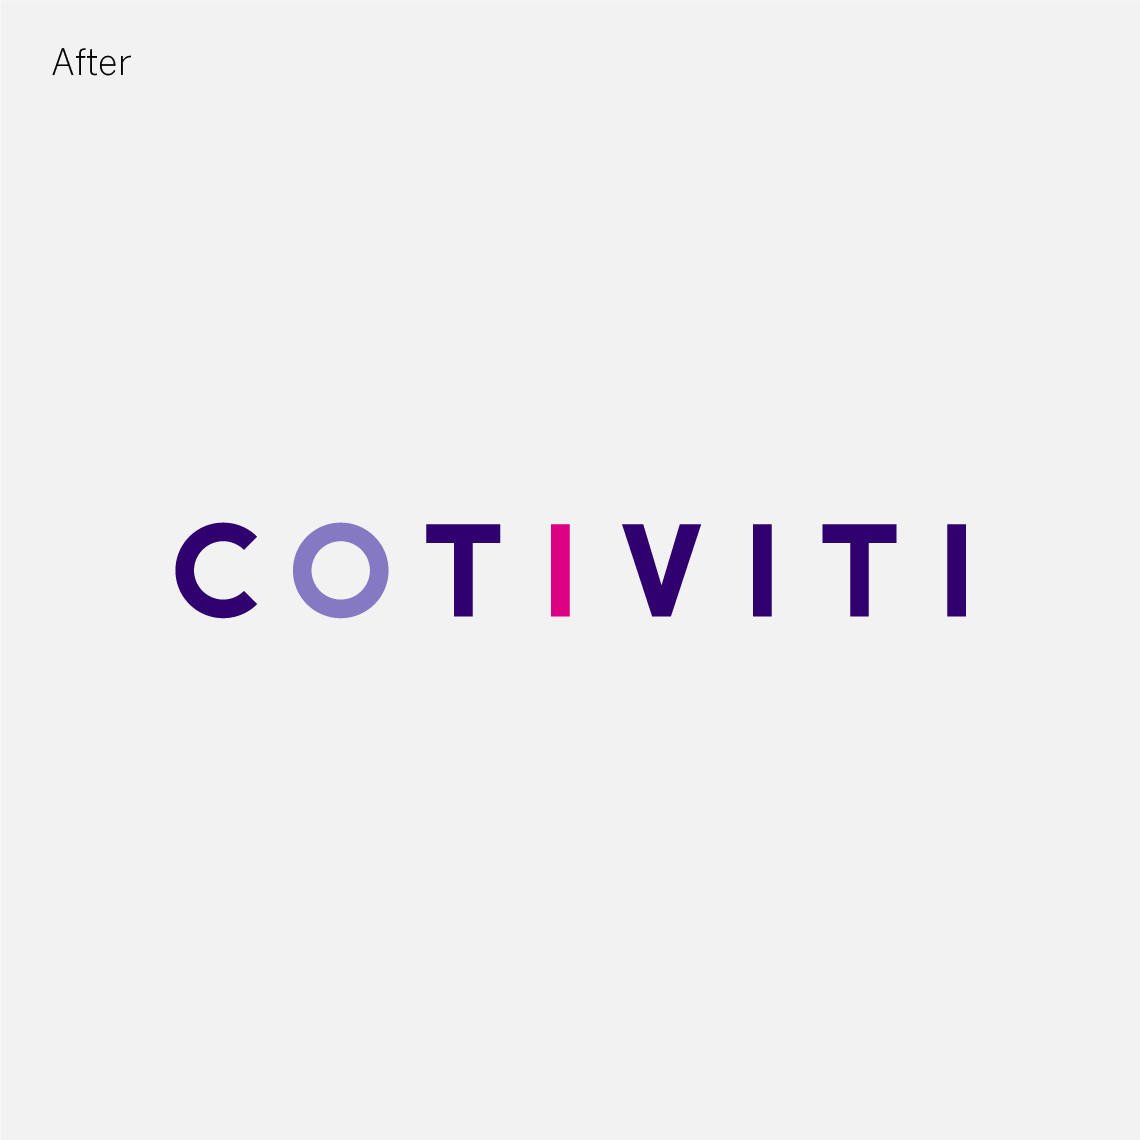 the new logo of Cotiviti, into new Cotiviti, integrating aspects of legacy Verscend and Cotiviti